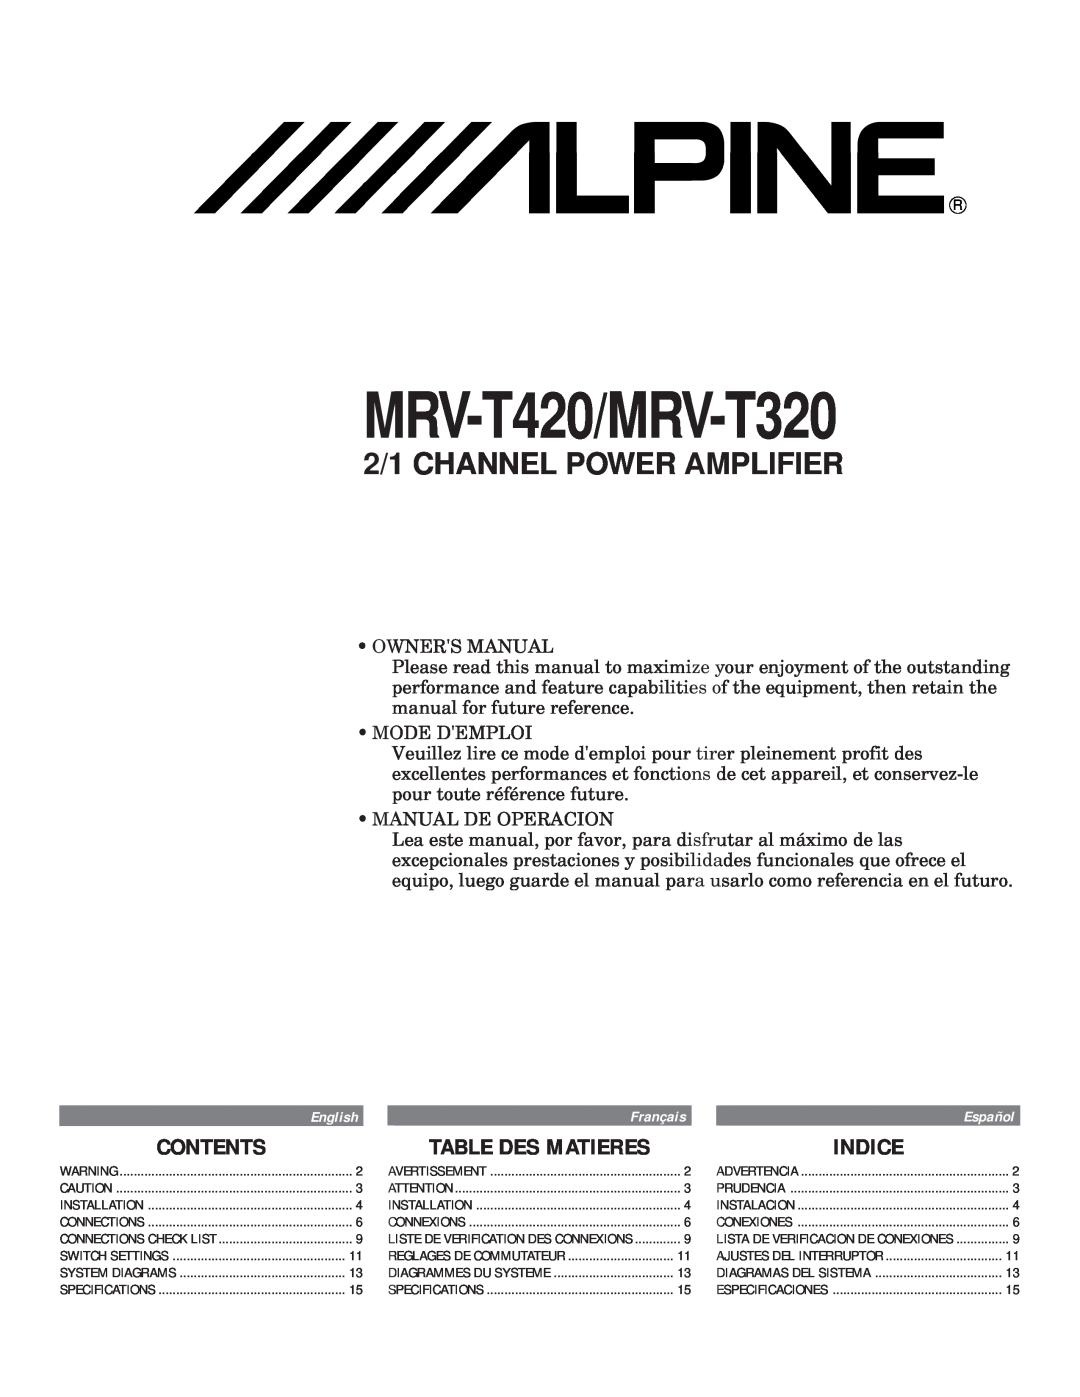 Alpine owner manual Contents, Indice, Table Des Matieres, MRV-T420/MRV-T320, 2/1 CHANNEL POWER AMPLIFIER 